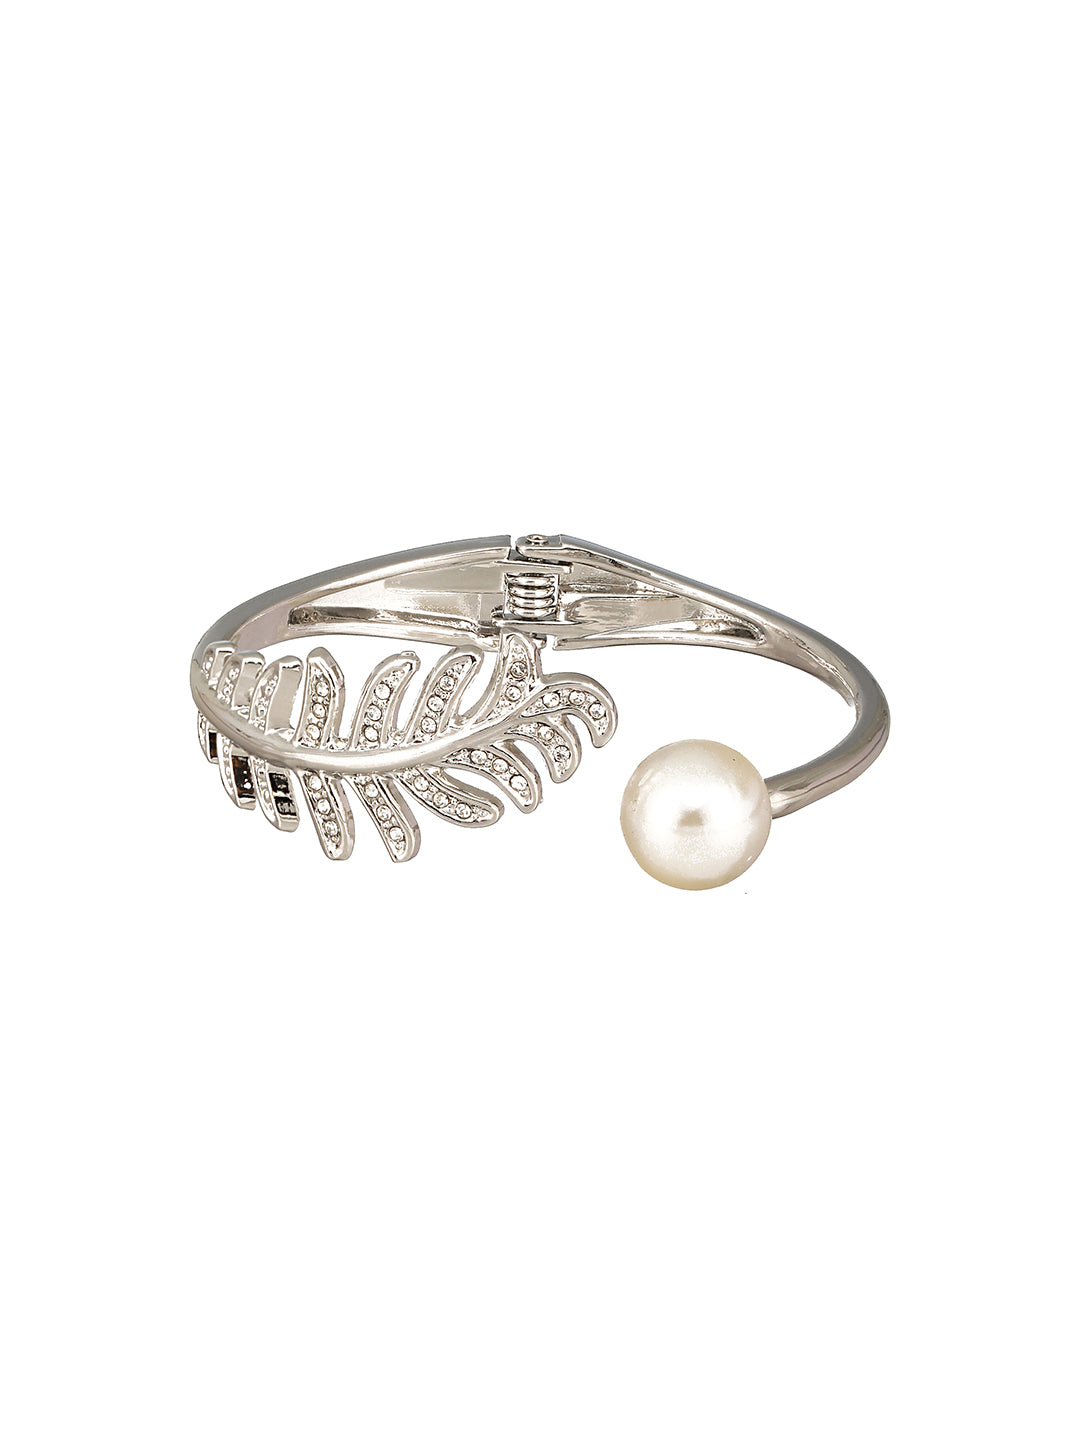 JAZZ AND SIZZLE Silver-Plated CZ Studded Pearl Beaded Cuff Bracelet - Jazzandsizzle